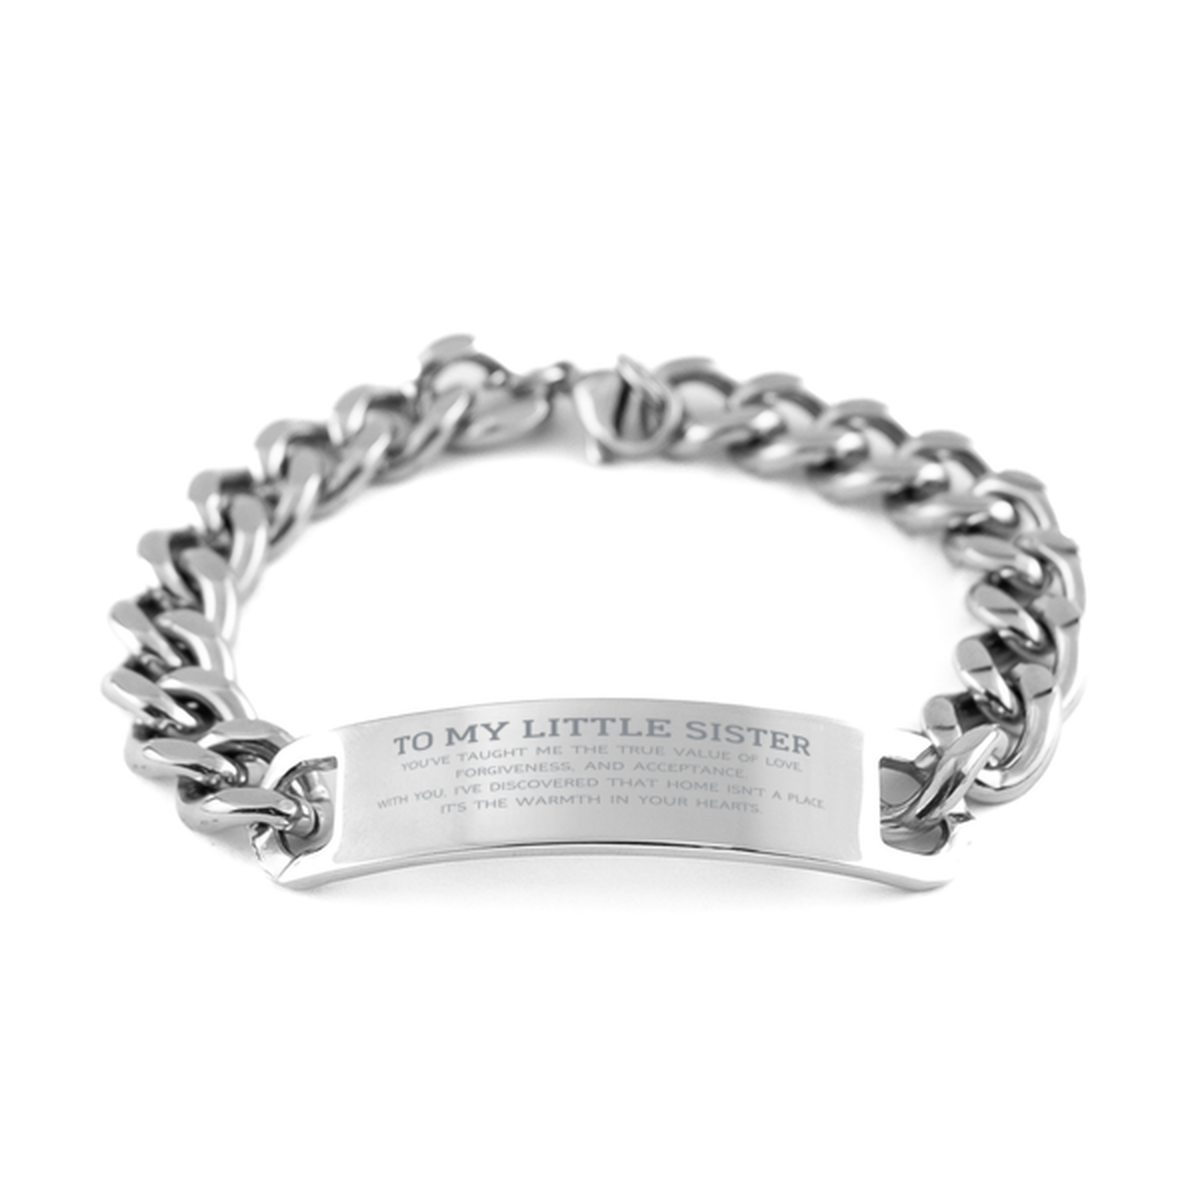 To My Little Sister Gifts, You've taught me the true value of love, Thank You Gifts For Little Sister, Birthday Cuban Chain Stainless Steel Bracelet For Little Sister